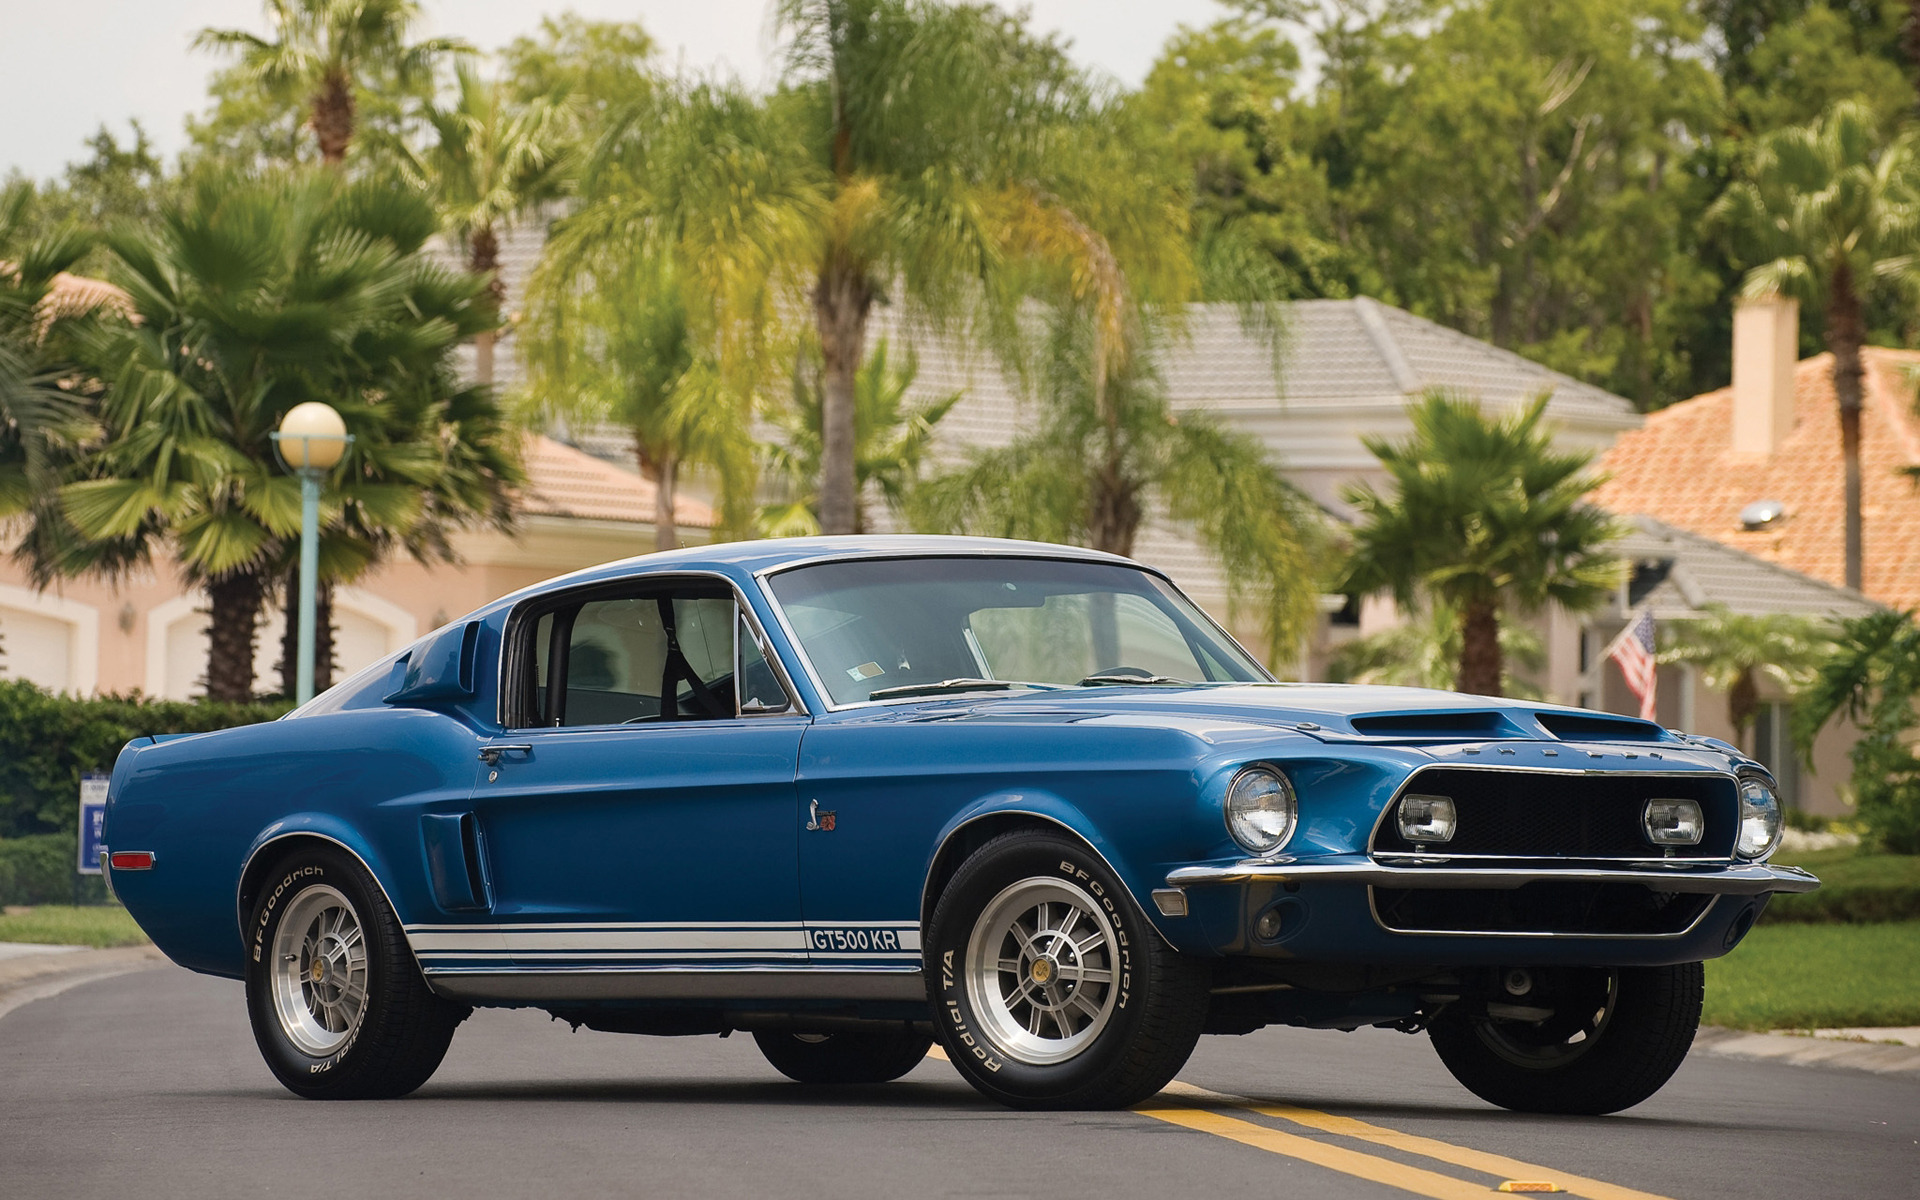 auto_ford_mustang_mustang_shelby_gt_500_kr___1968_028031_.jpg